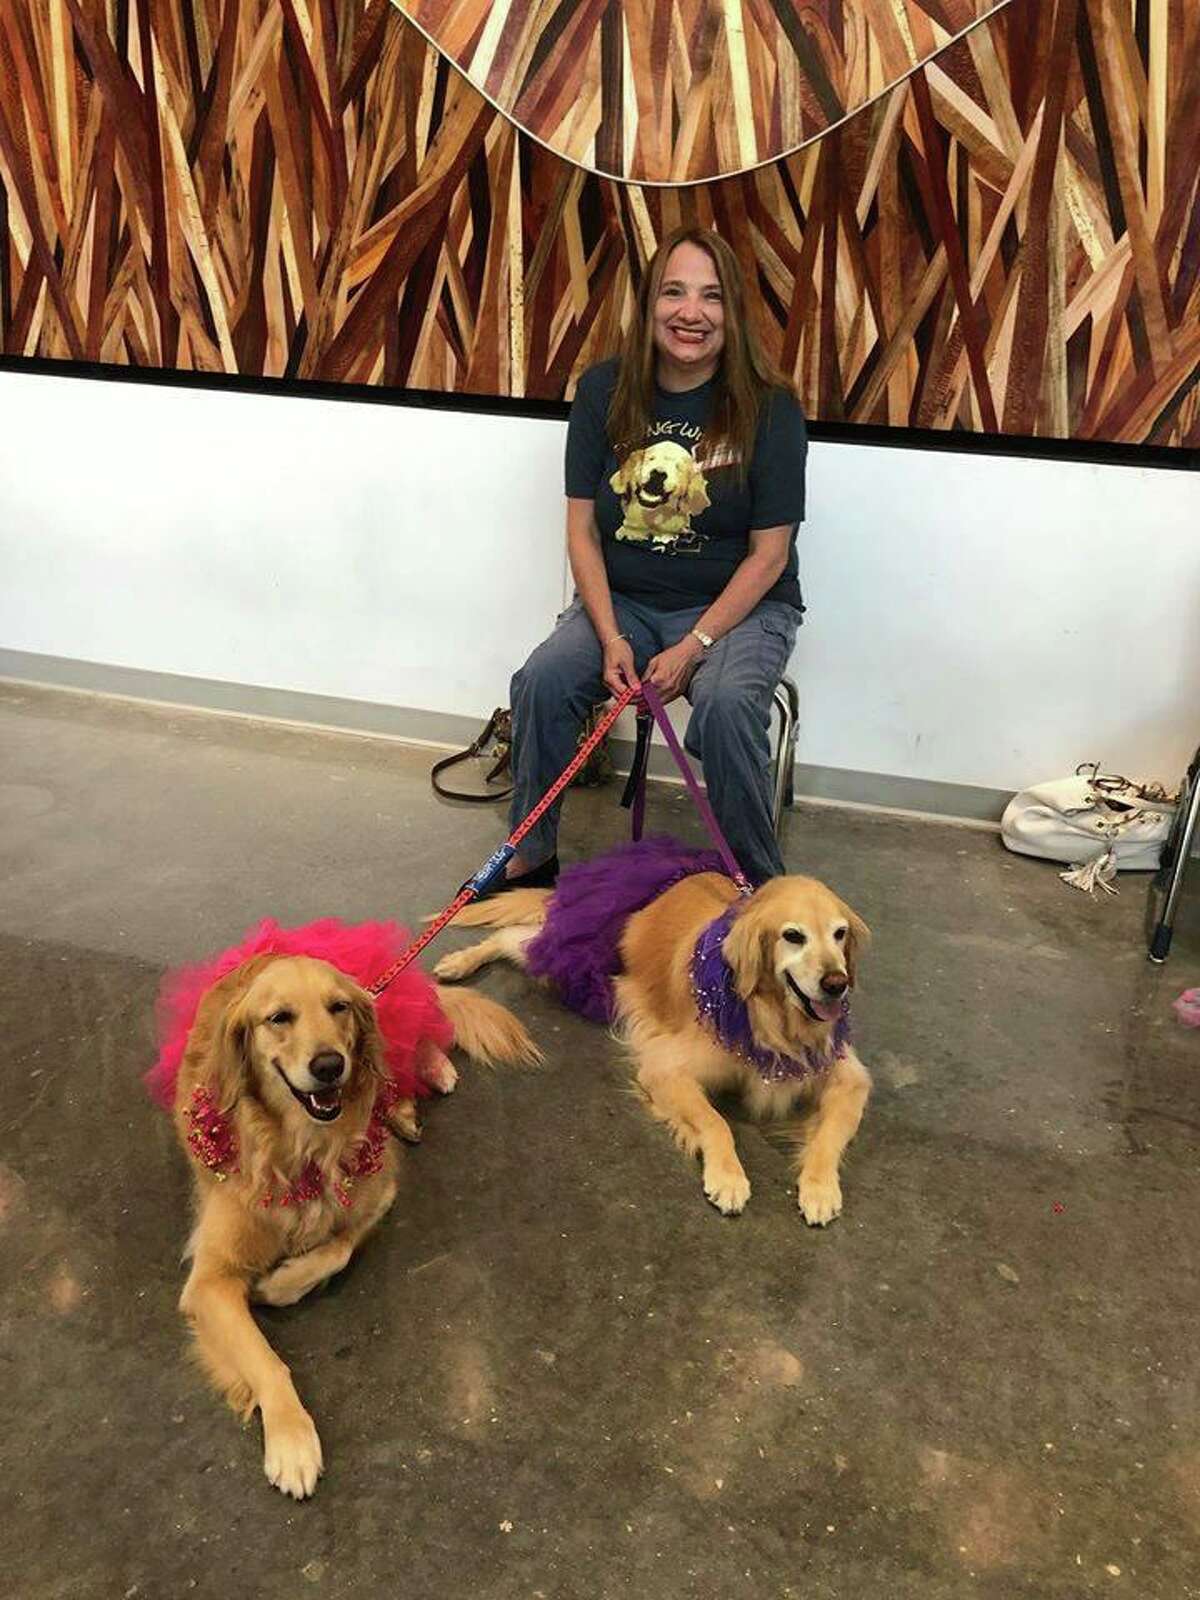 Determined to give back to her community despite living with lupus, Missouri City resident Cheryl Yetz trained her pets as therapy dogs to help older residents at nursing homes.